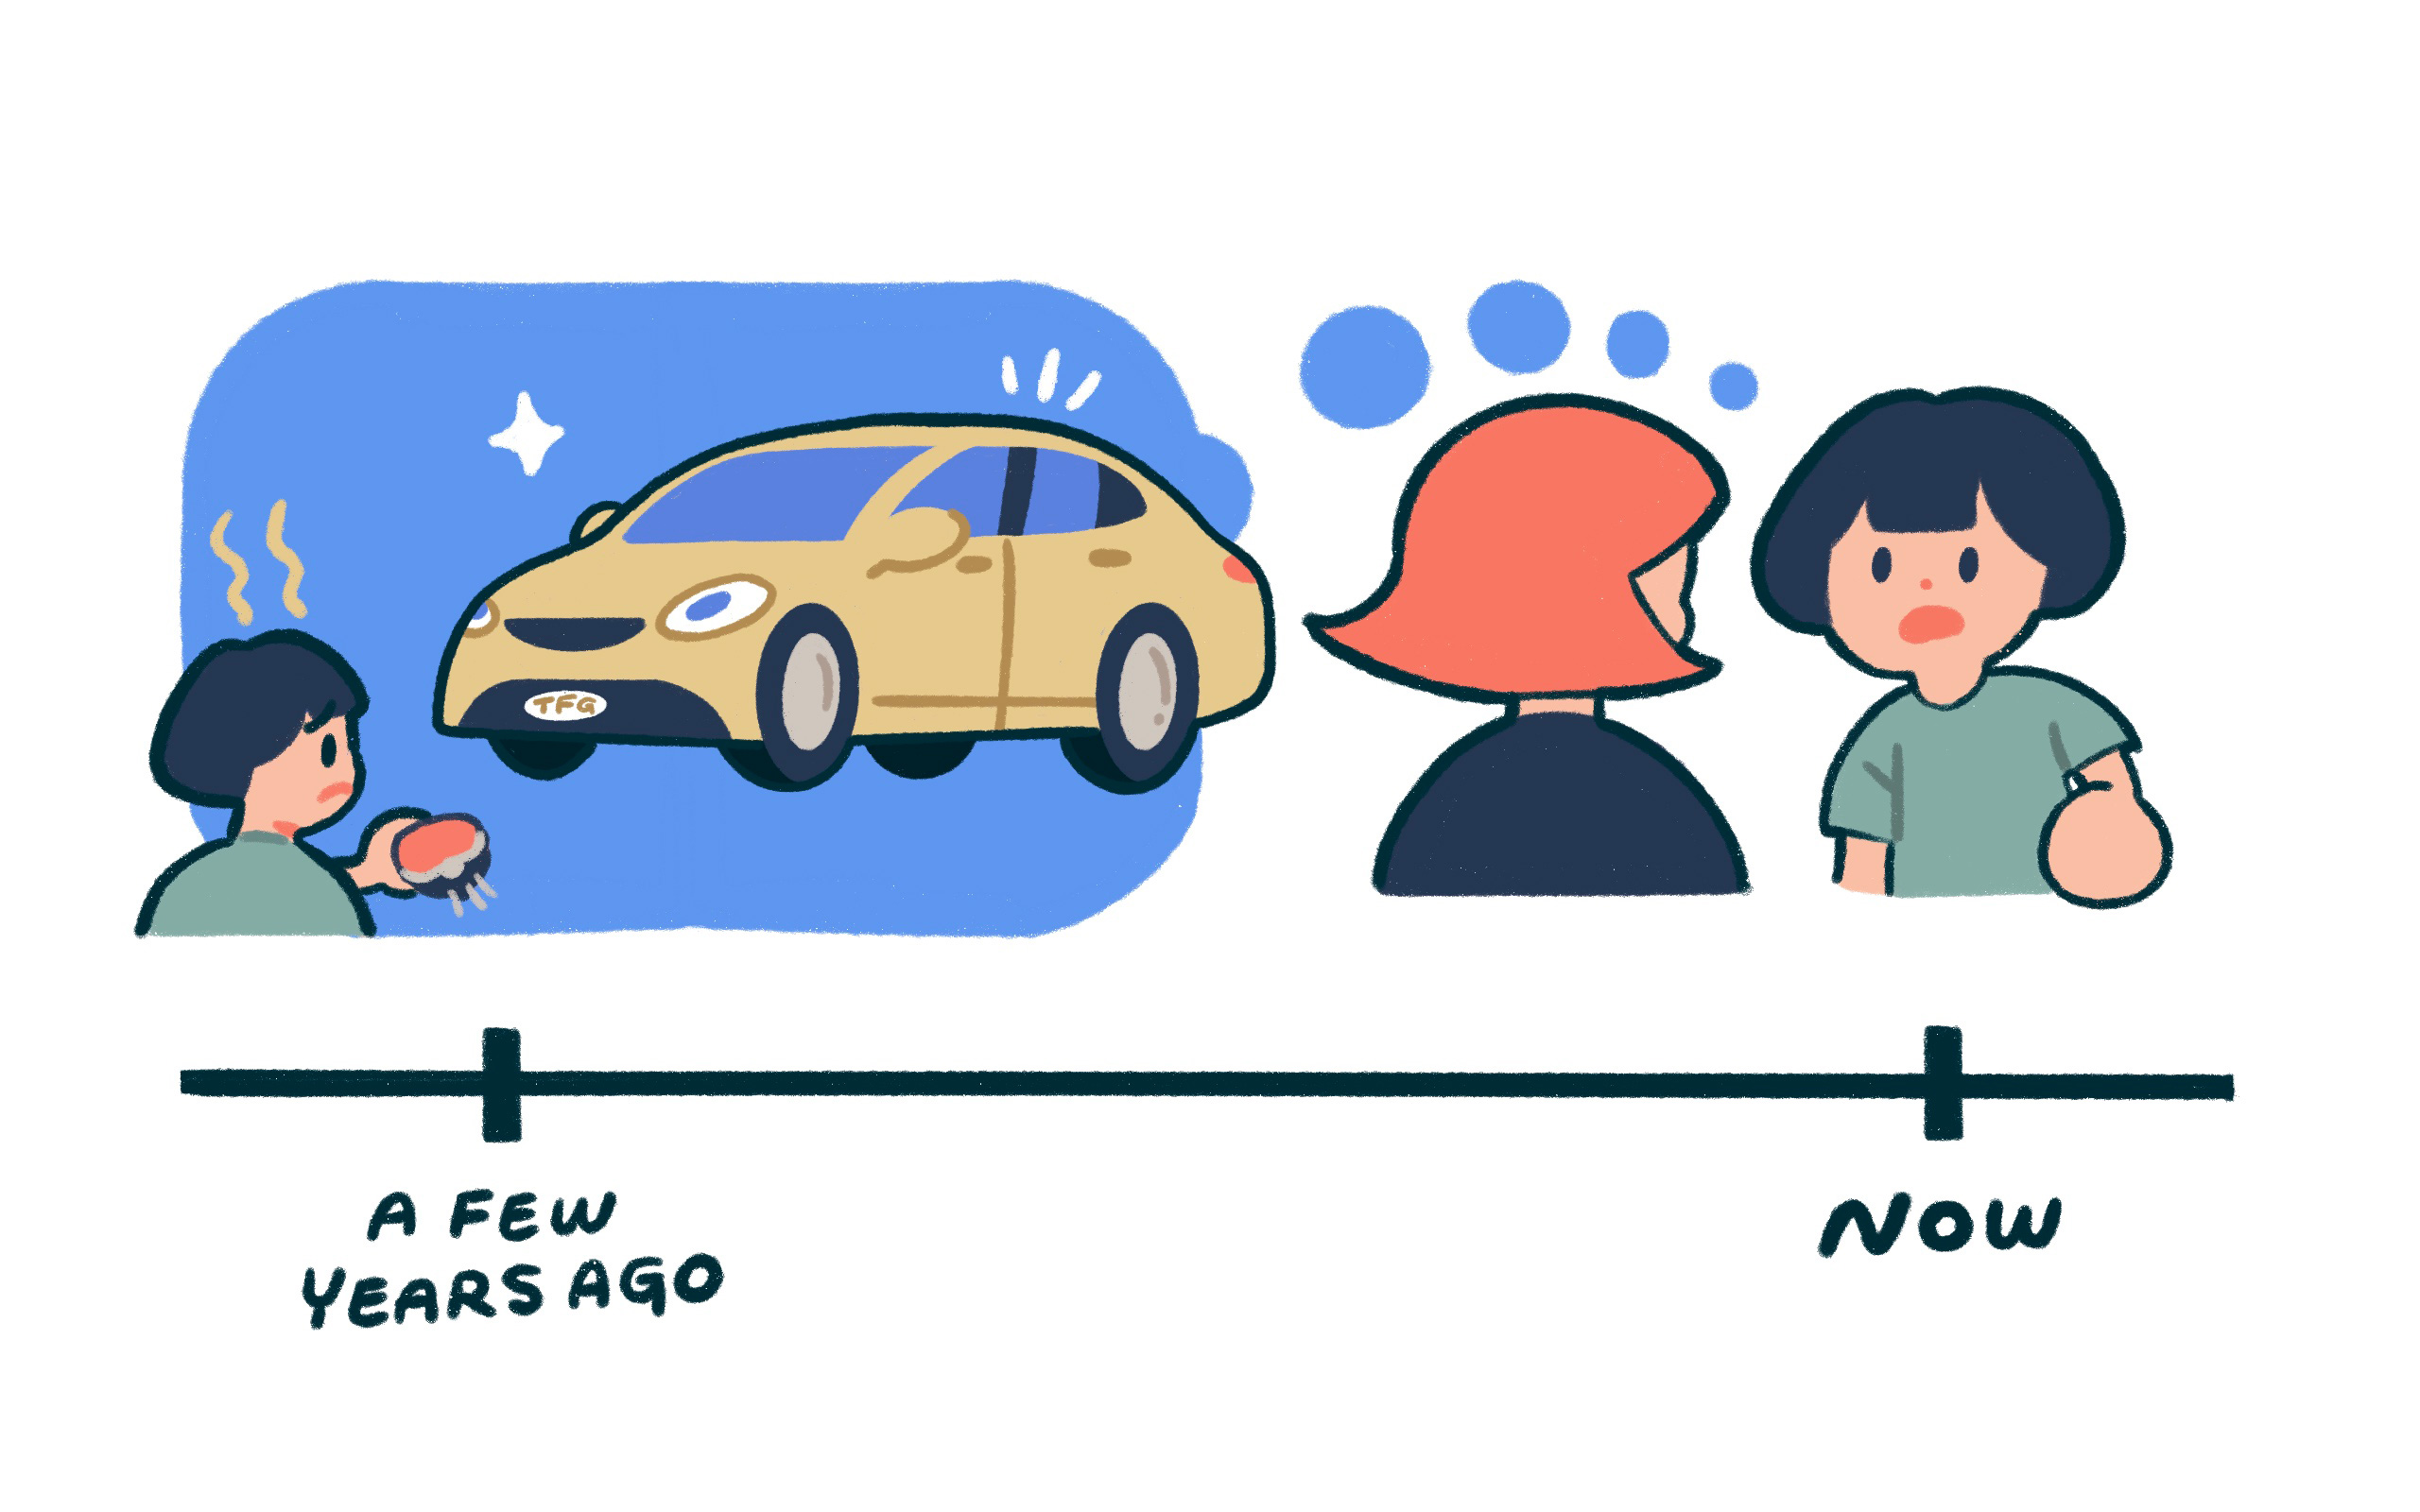 a timeline from a few years ago when someone was poor and bought a car, to a conversation occuring now